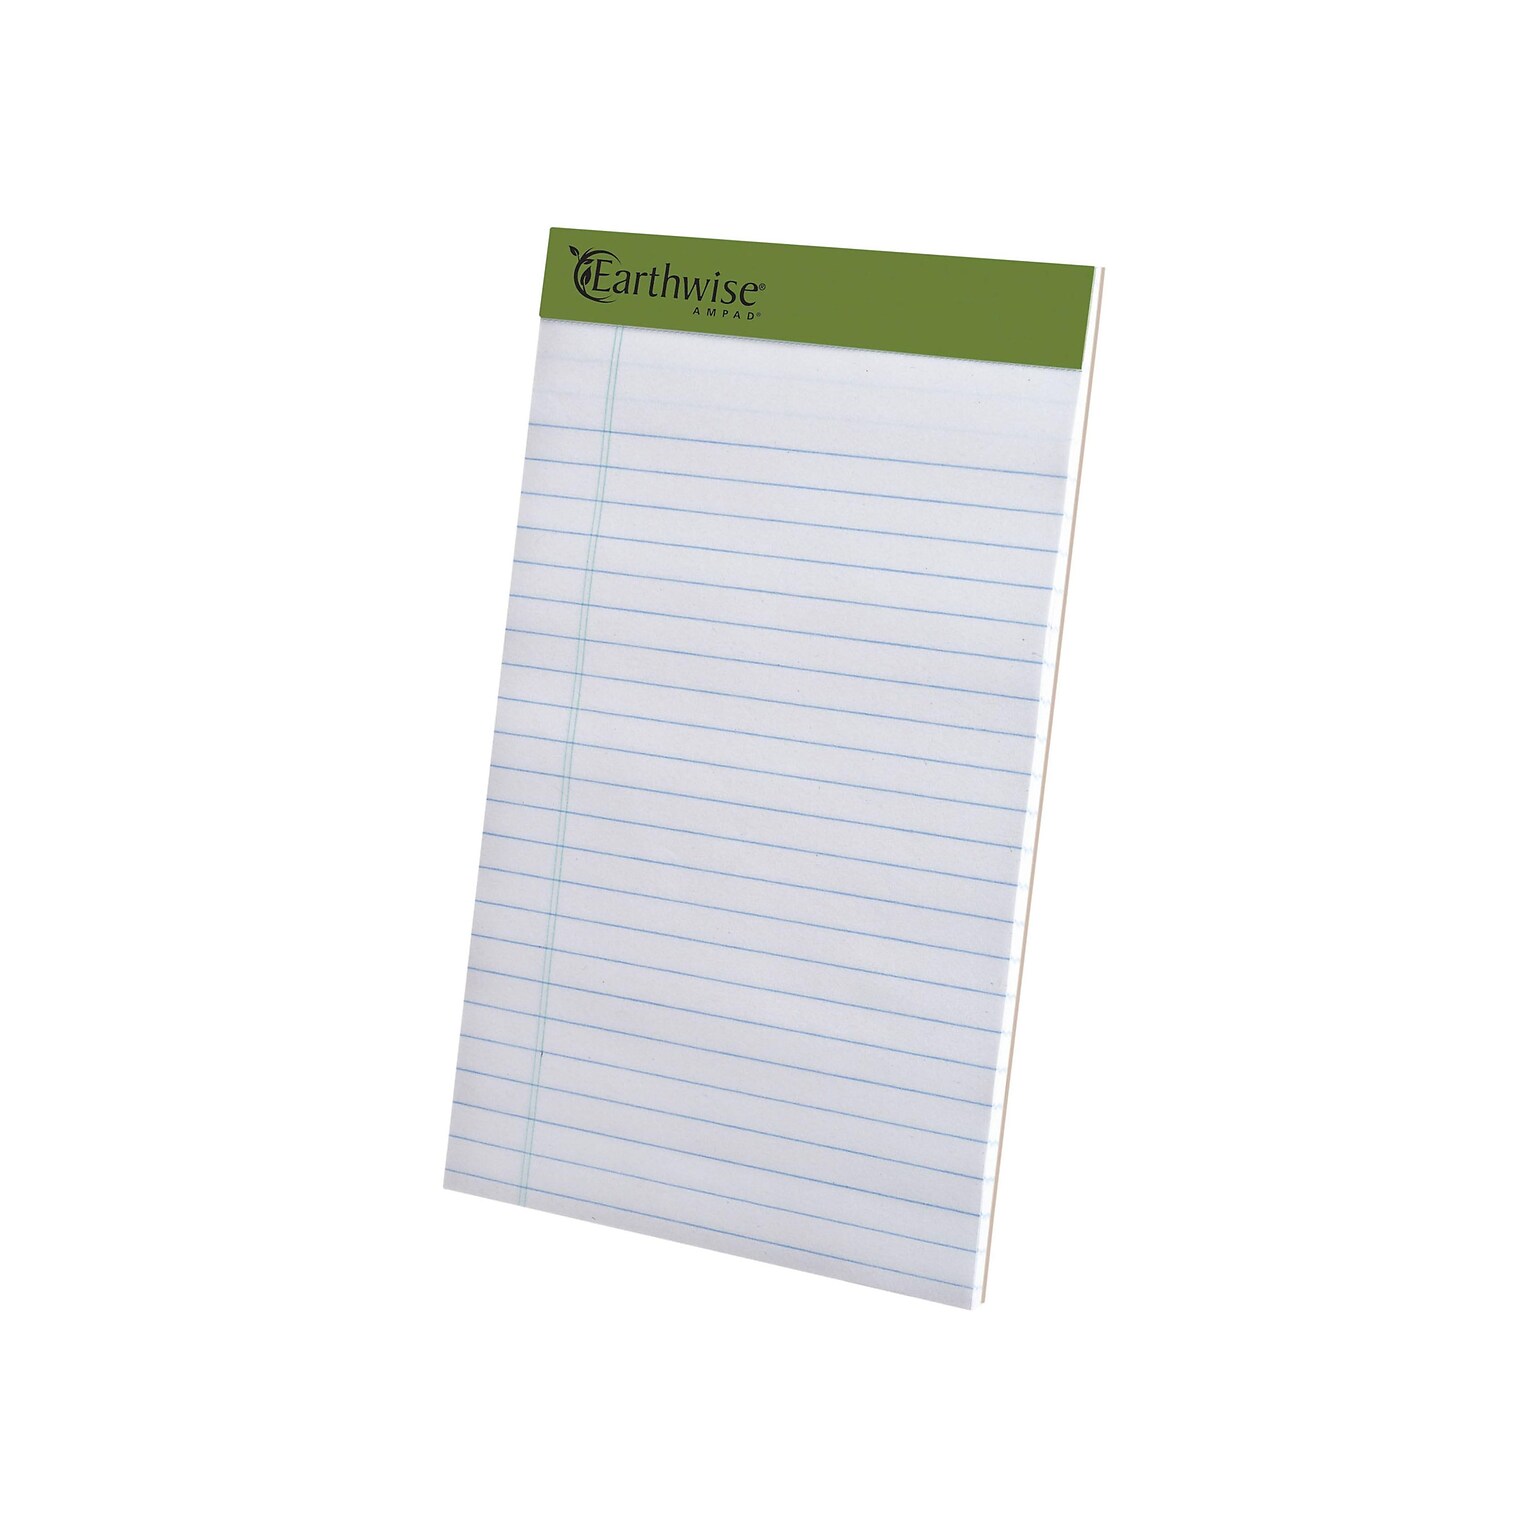 Earthwise by Ampad Notepads, 5 x 8, College Ruled, White, 40 Sheets/Pad, 6 Pads/Pack (40112R)